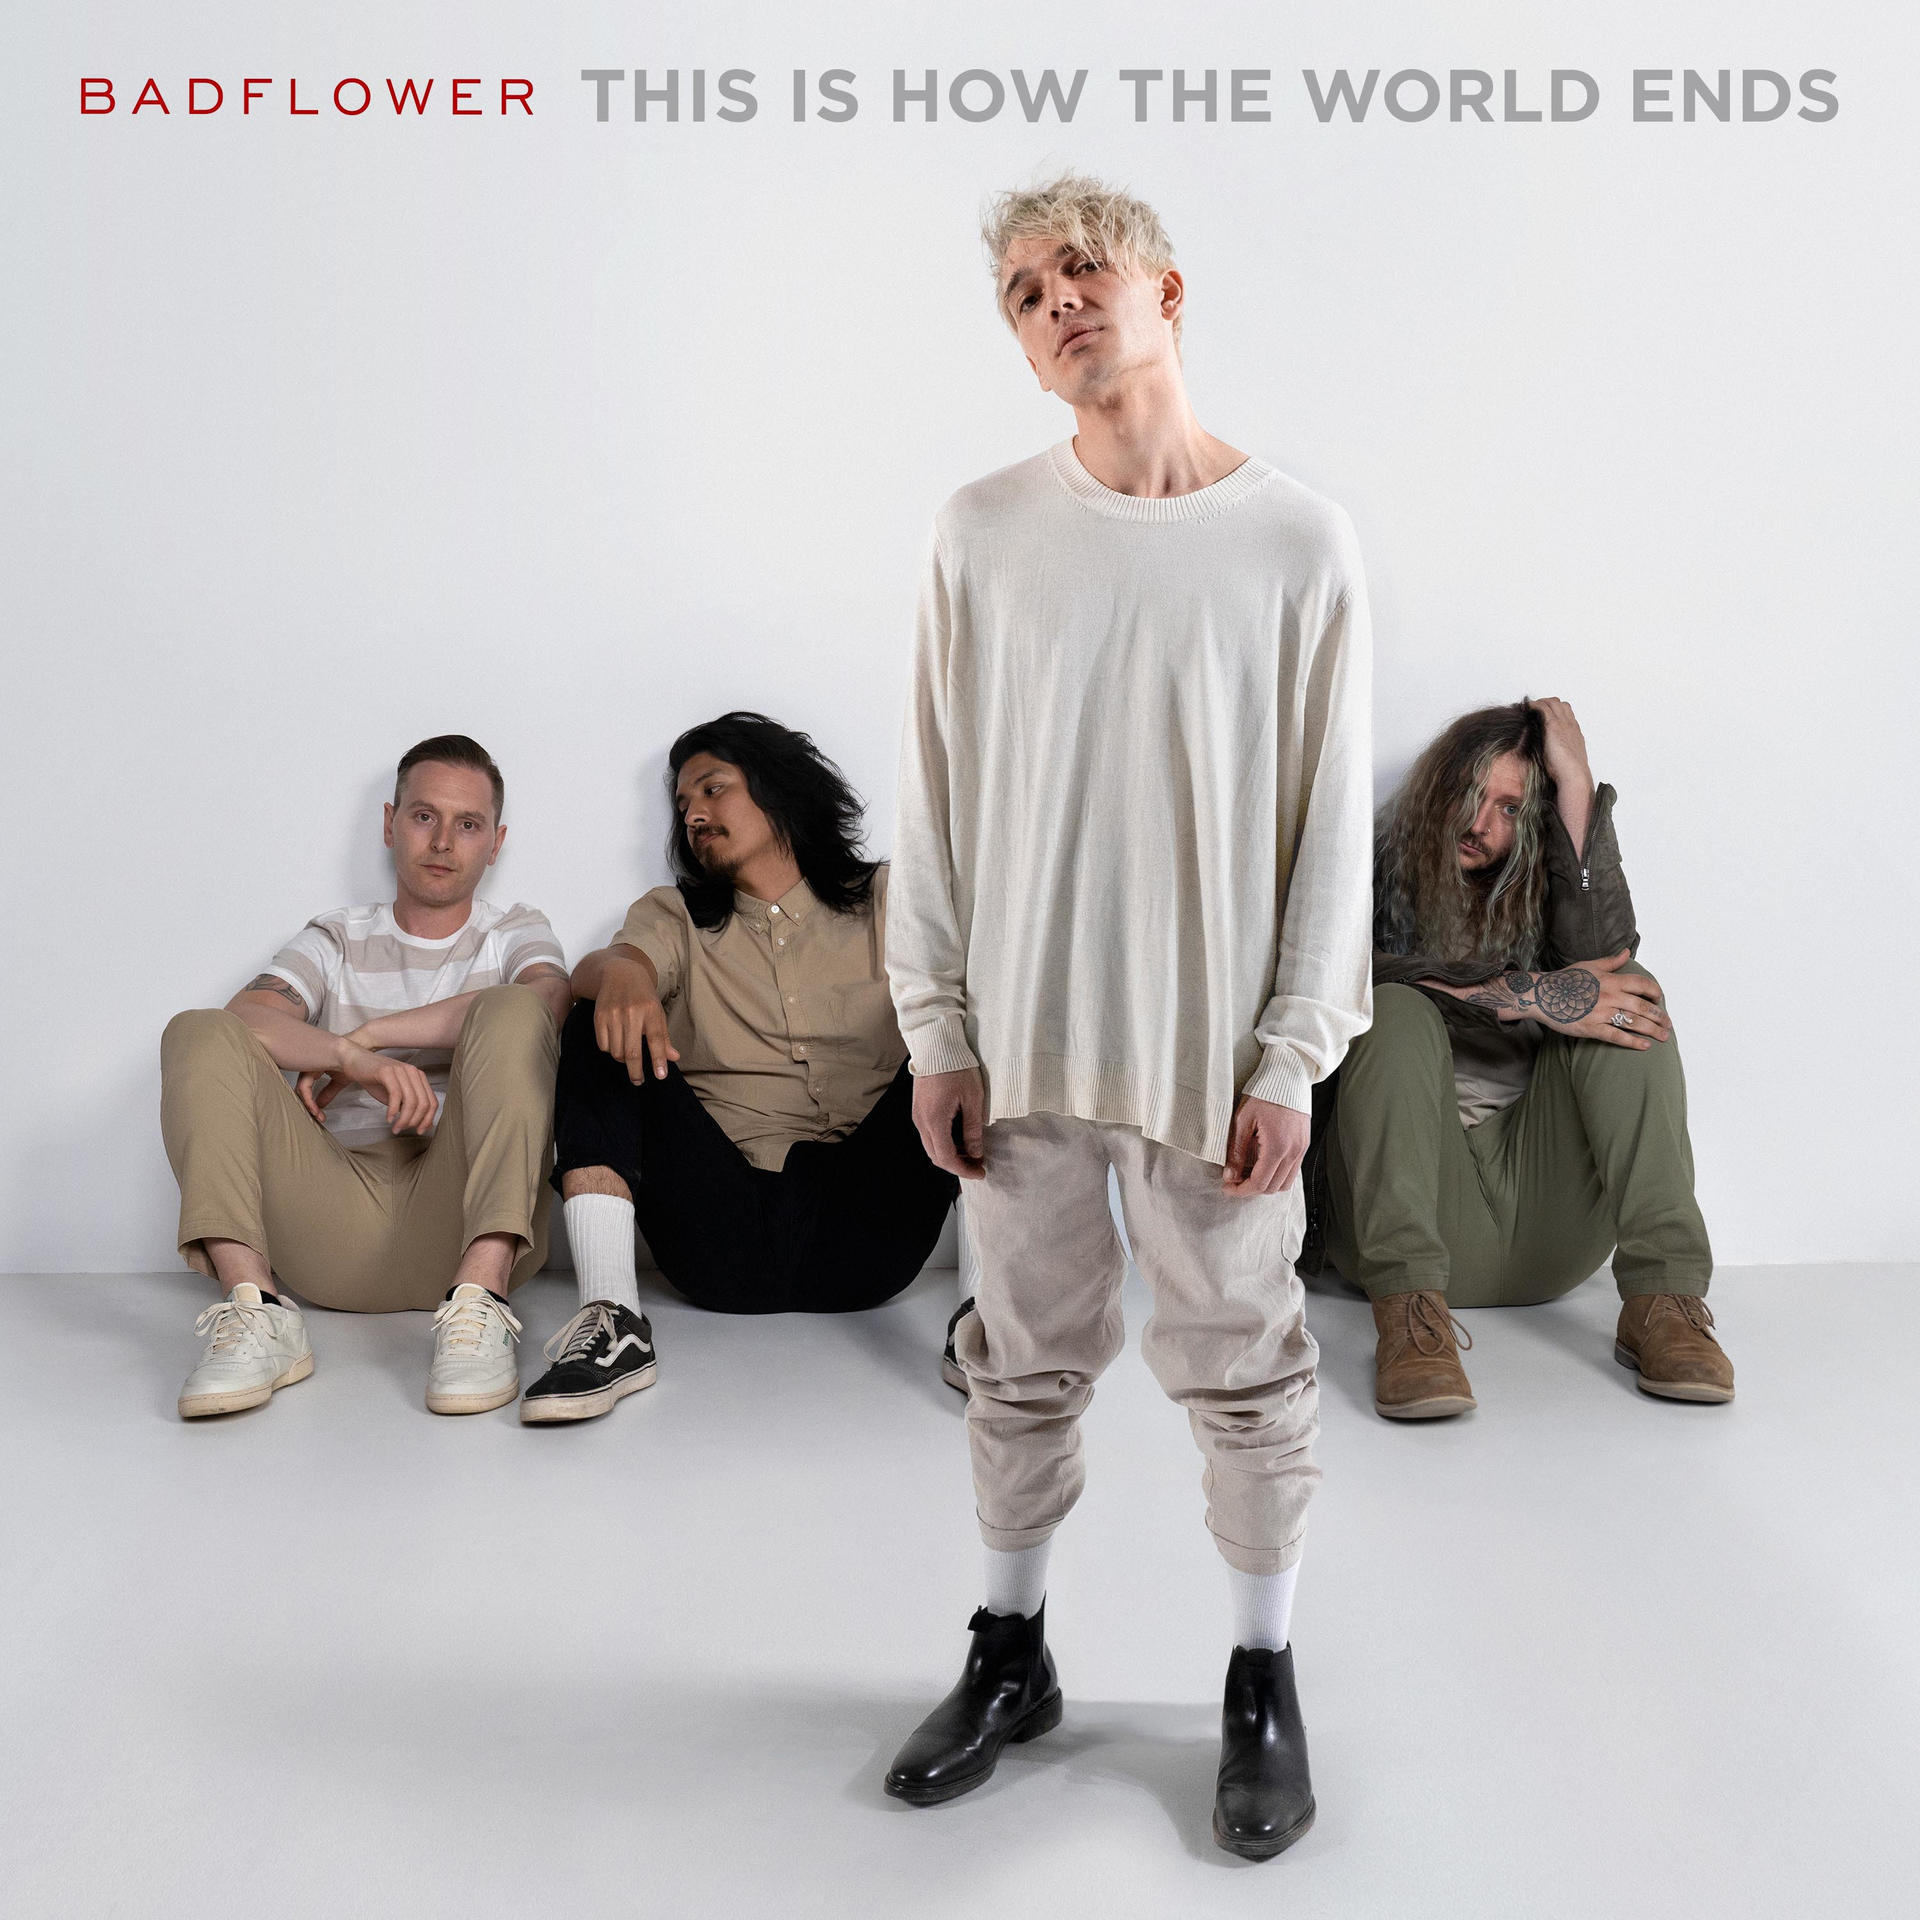 - - (CD) This How Badflower Is Ends The World